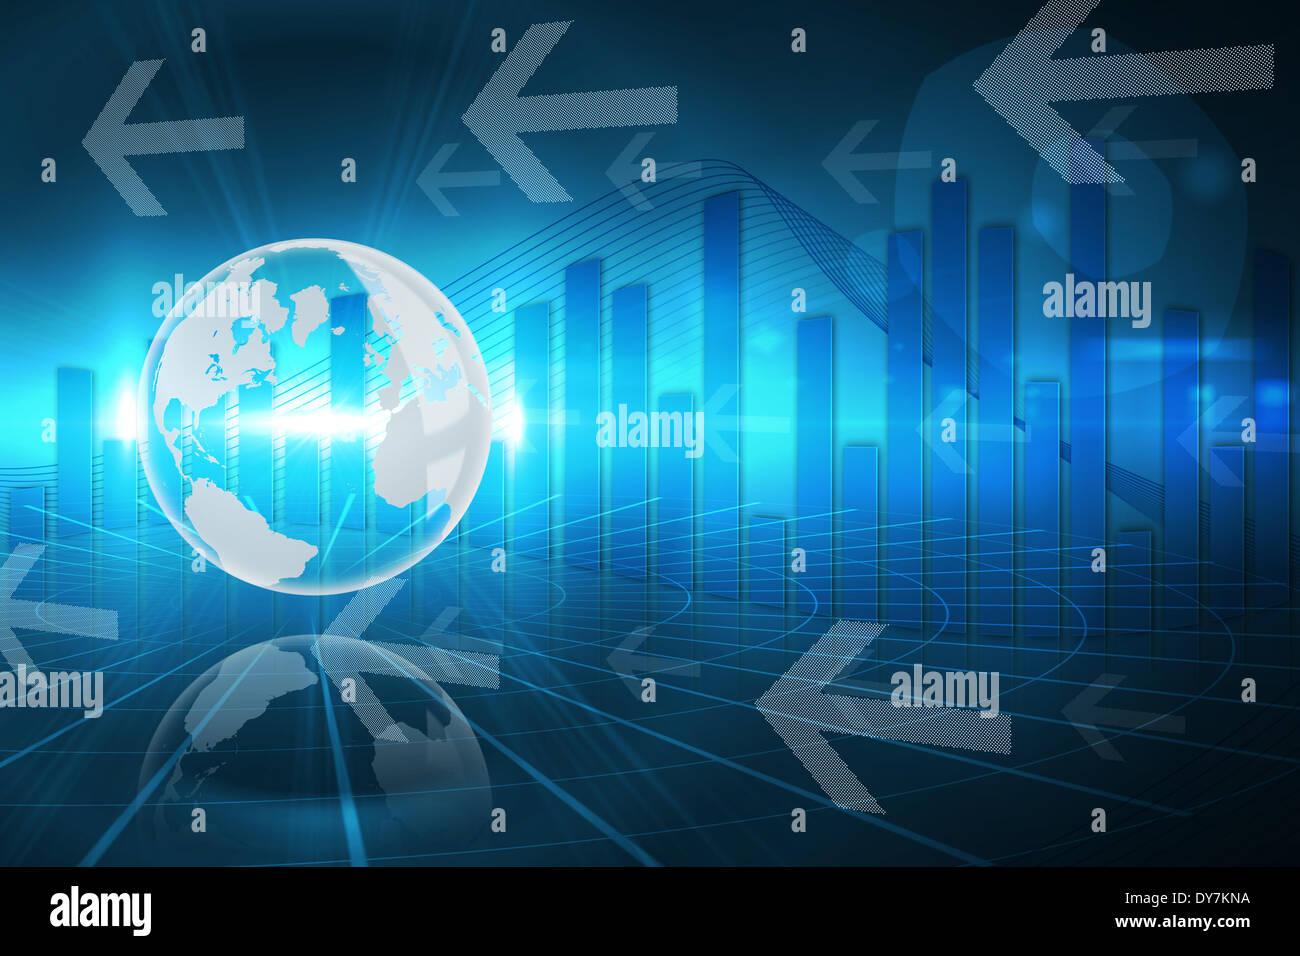 Global business graphic in blue Stock Photo